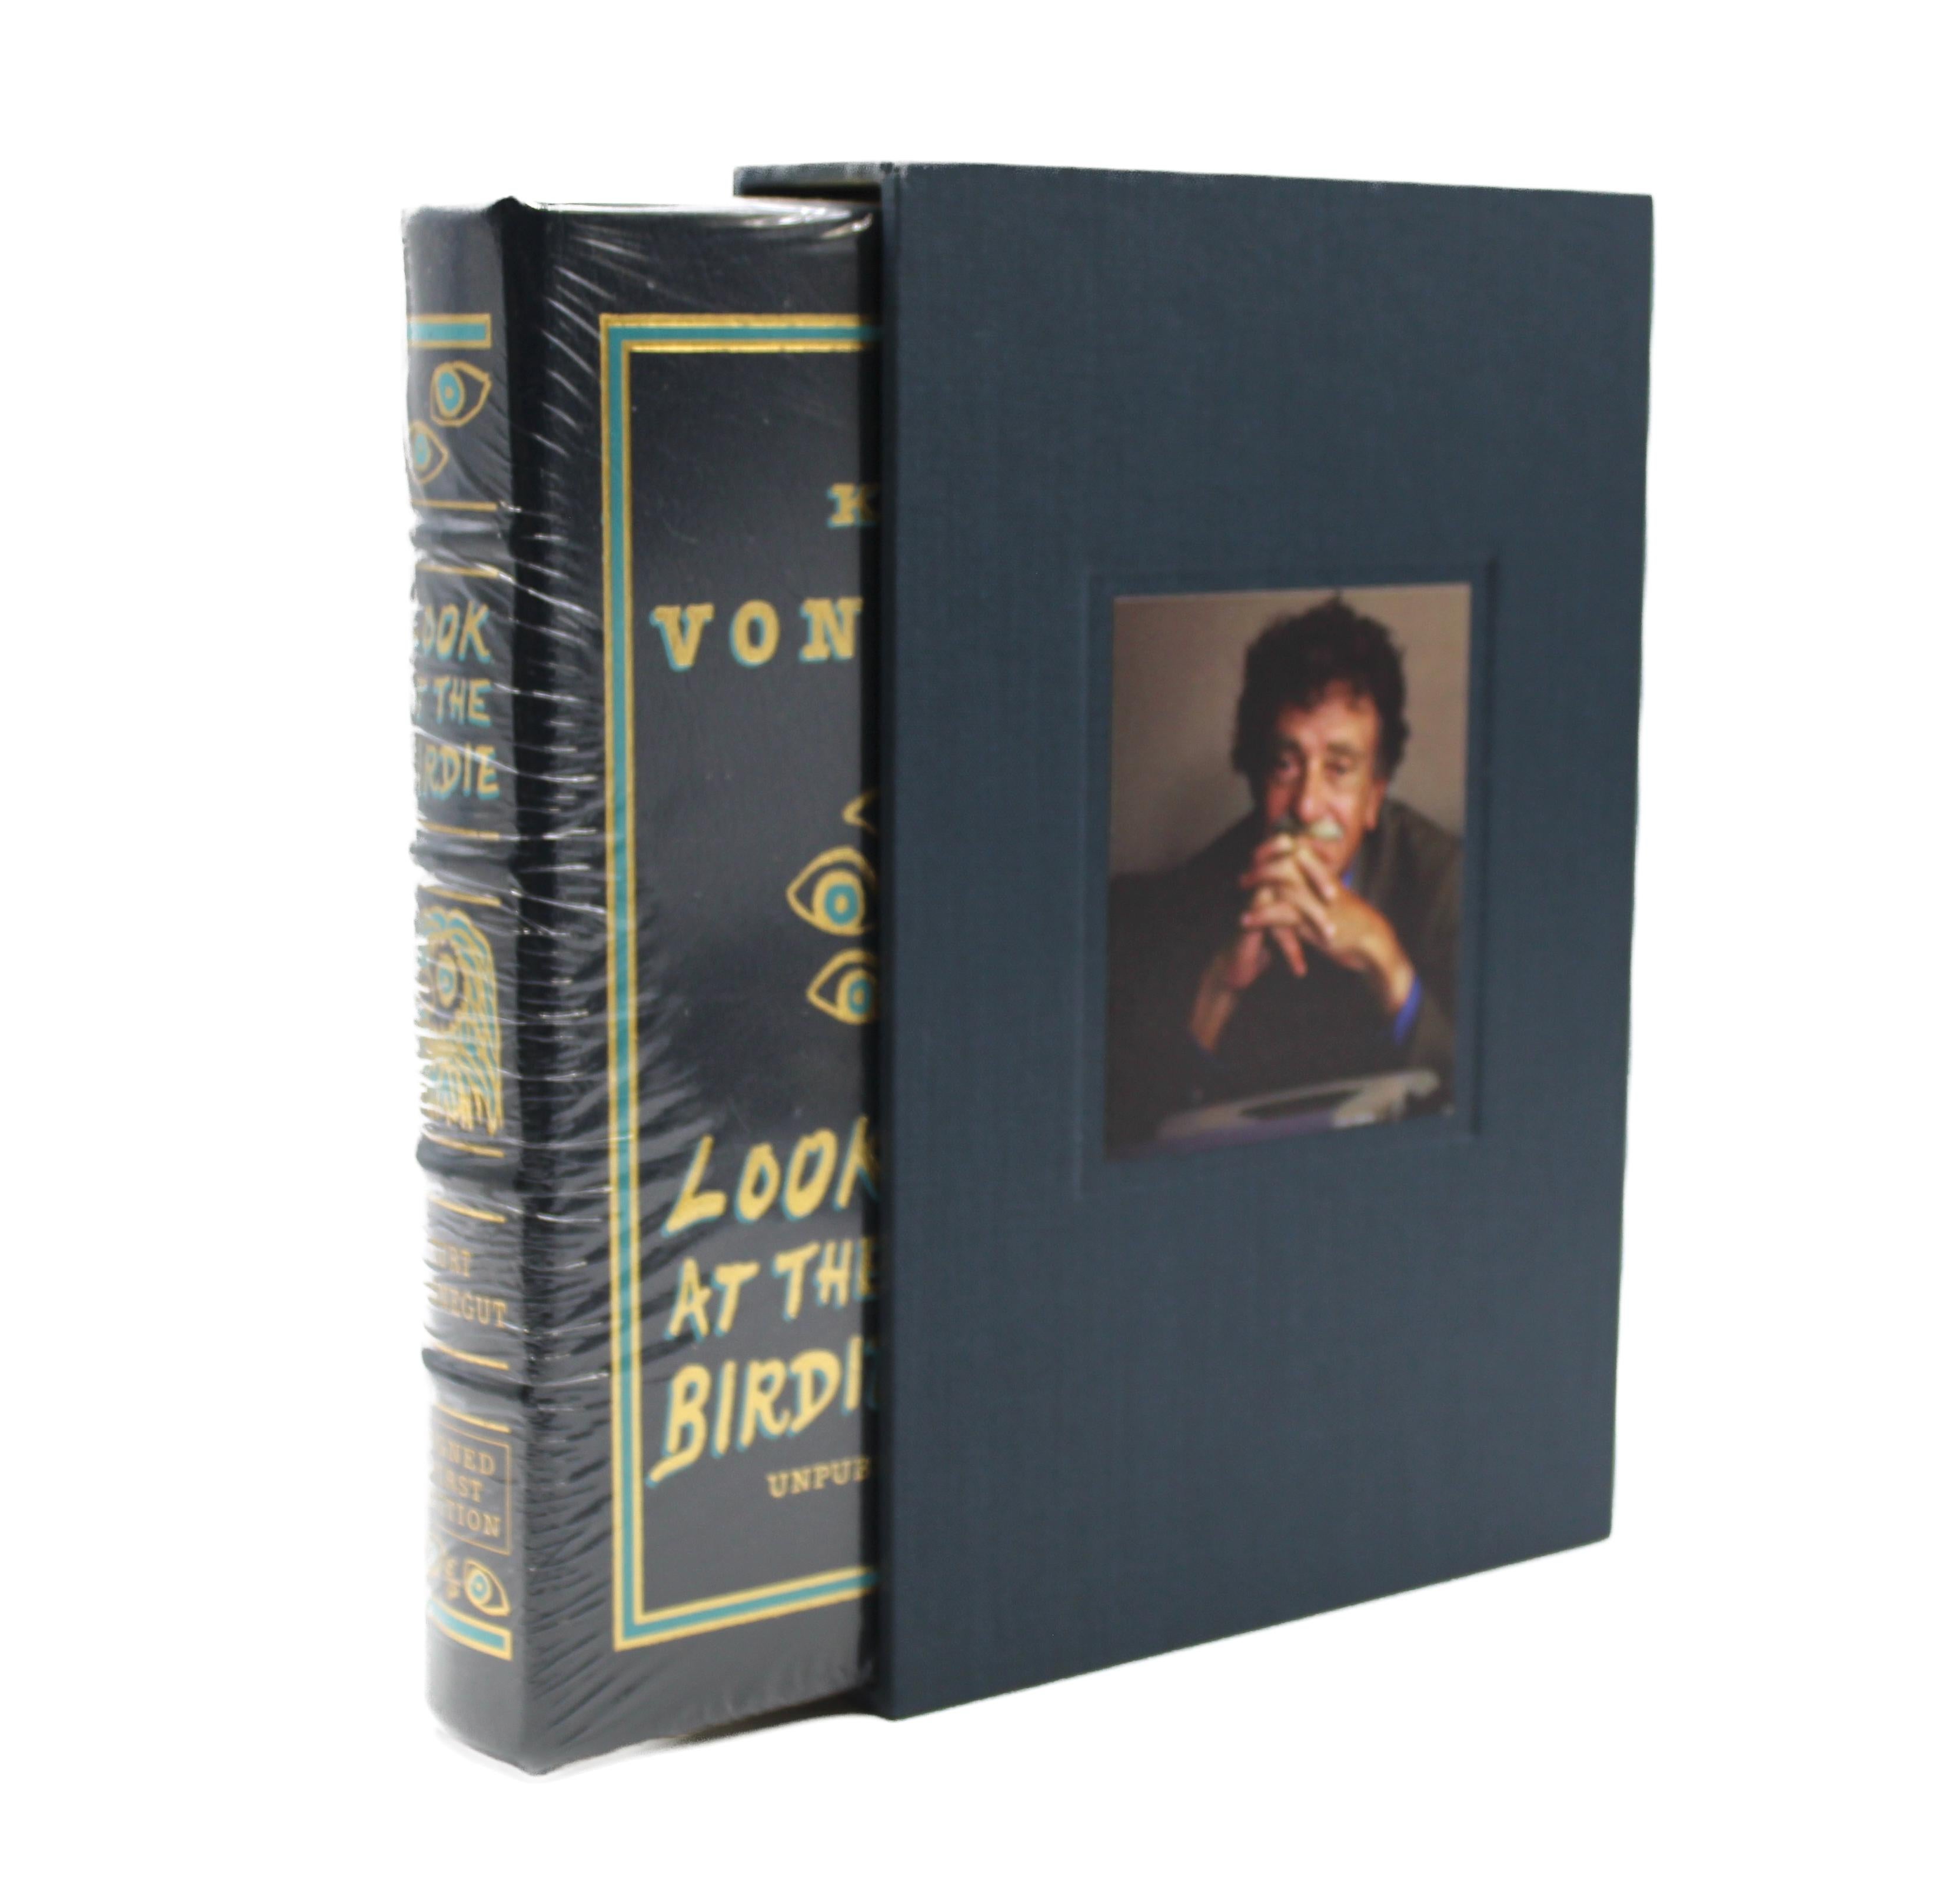 Gilt Look At The Birdie, Signed by Kurt Vonnegut, Easton Press Limited Edition, 2009 For Sale